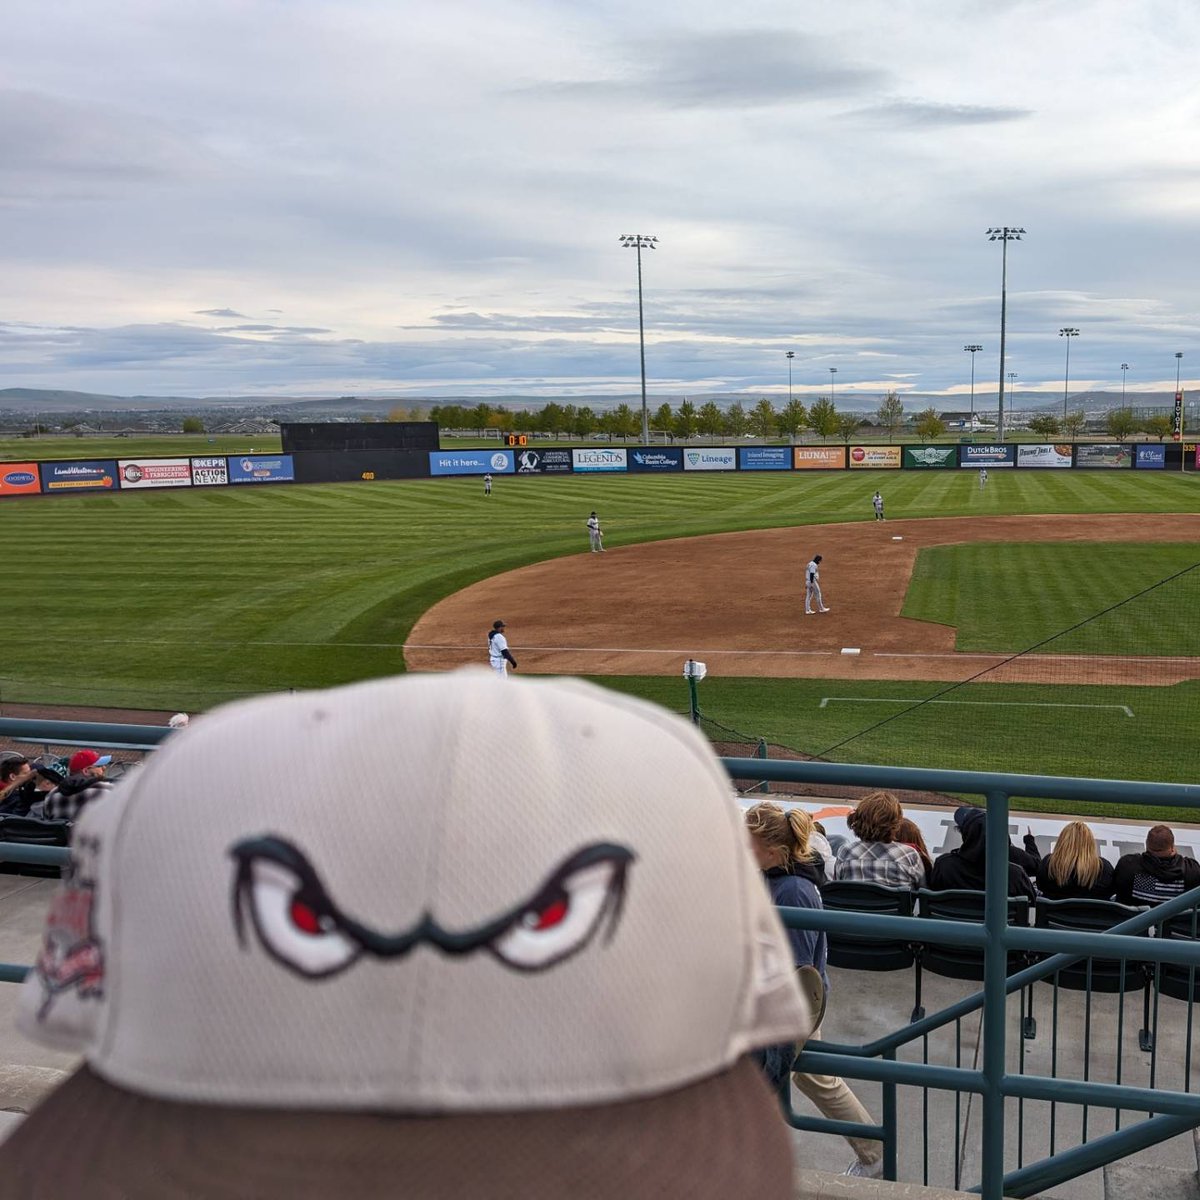 Well sadly our final game of our Roadtrip has come upon us between the @EverettAquaSox and the @TC_DustDevils. We also got an Awesome gift pack from 'The Man, The Myth, The Legend' himself - @ItsErikMertens #MiLB #TCDustDevils #DustDevils